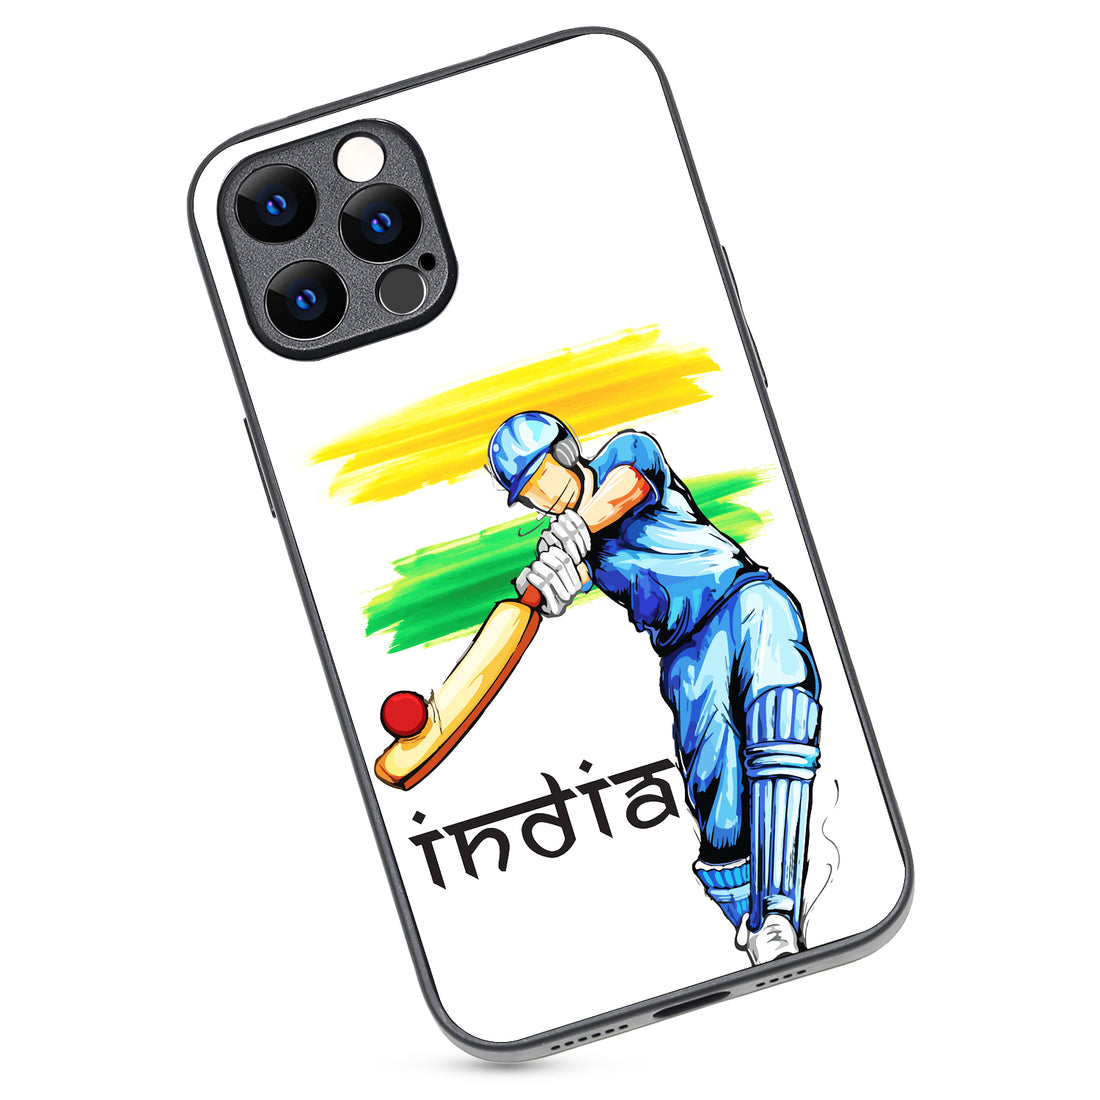 Indian Bold iPhone 12 Pro Max Case